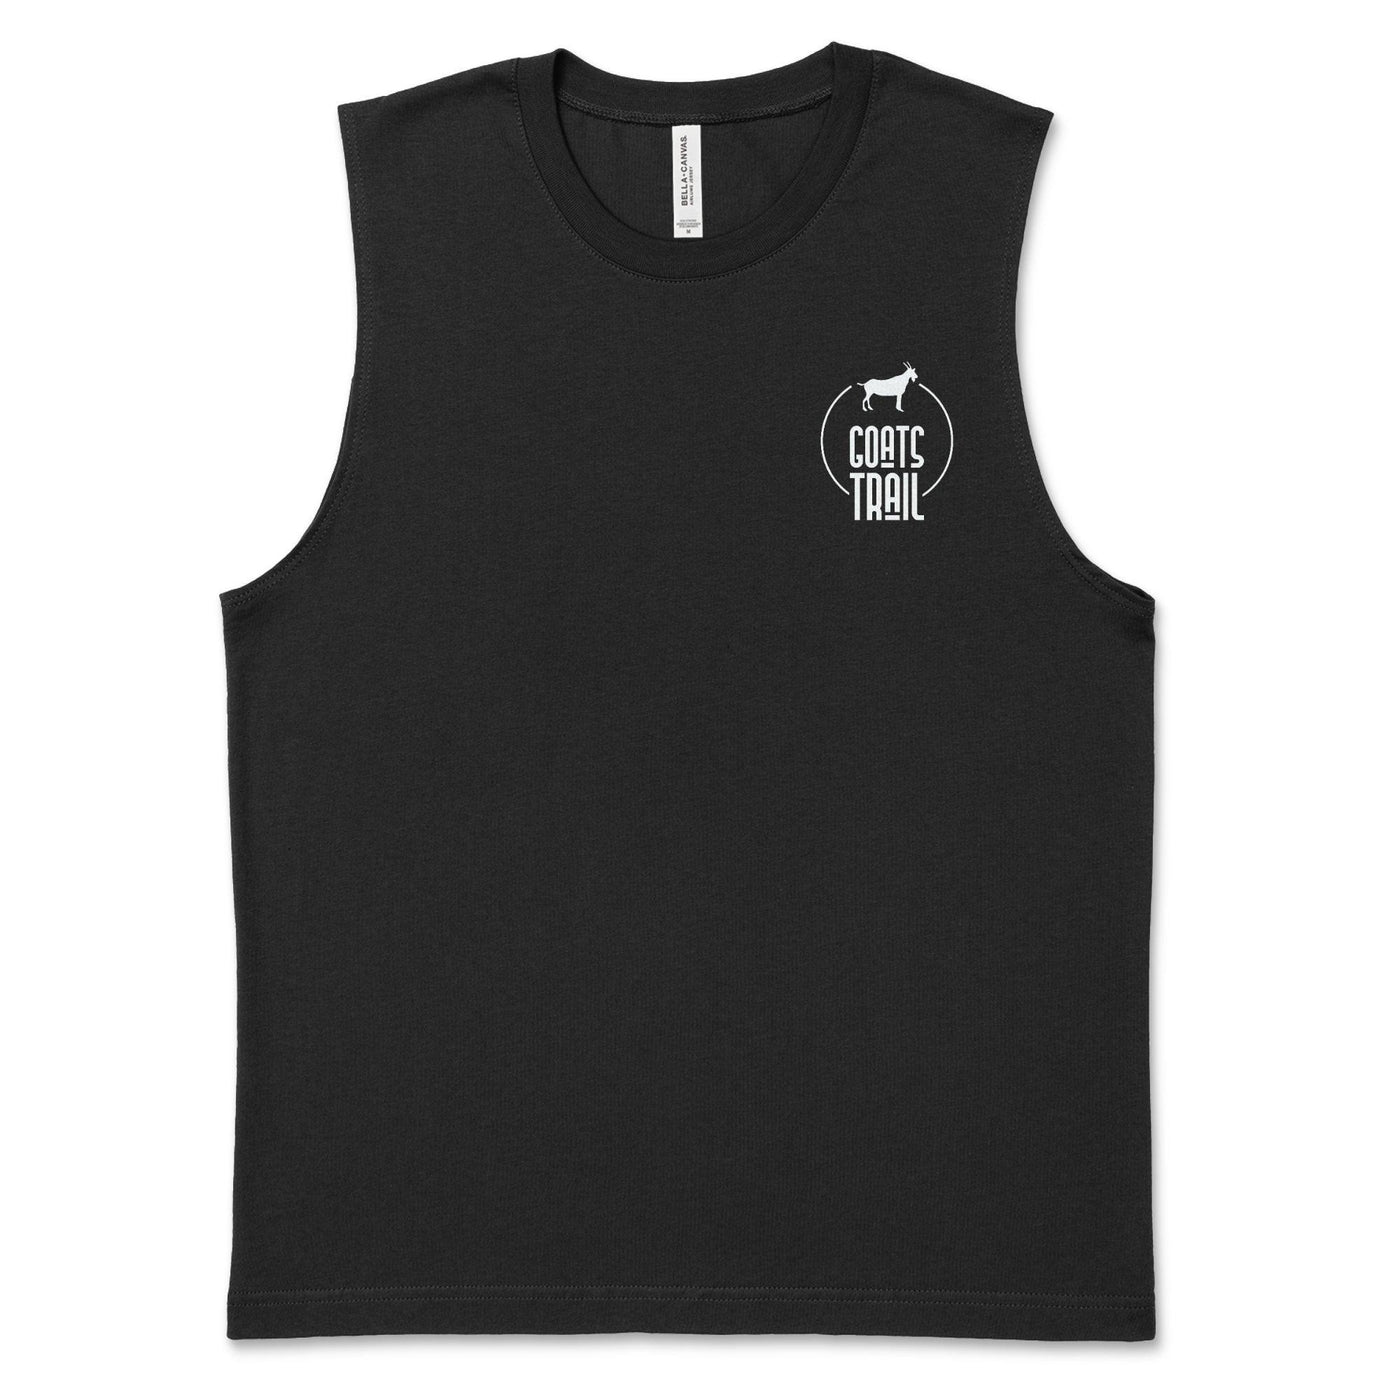 Men's Gladiator Muscle Tank Top - Goats Trail